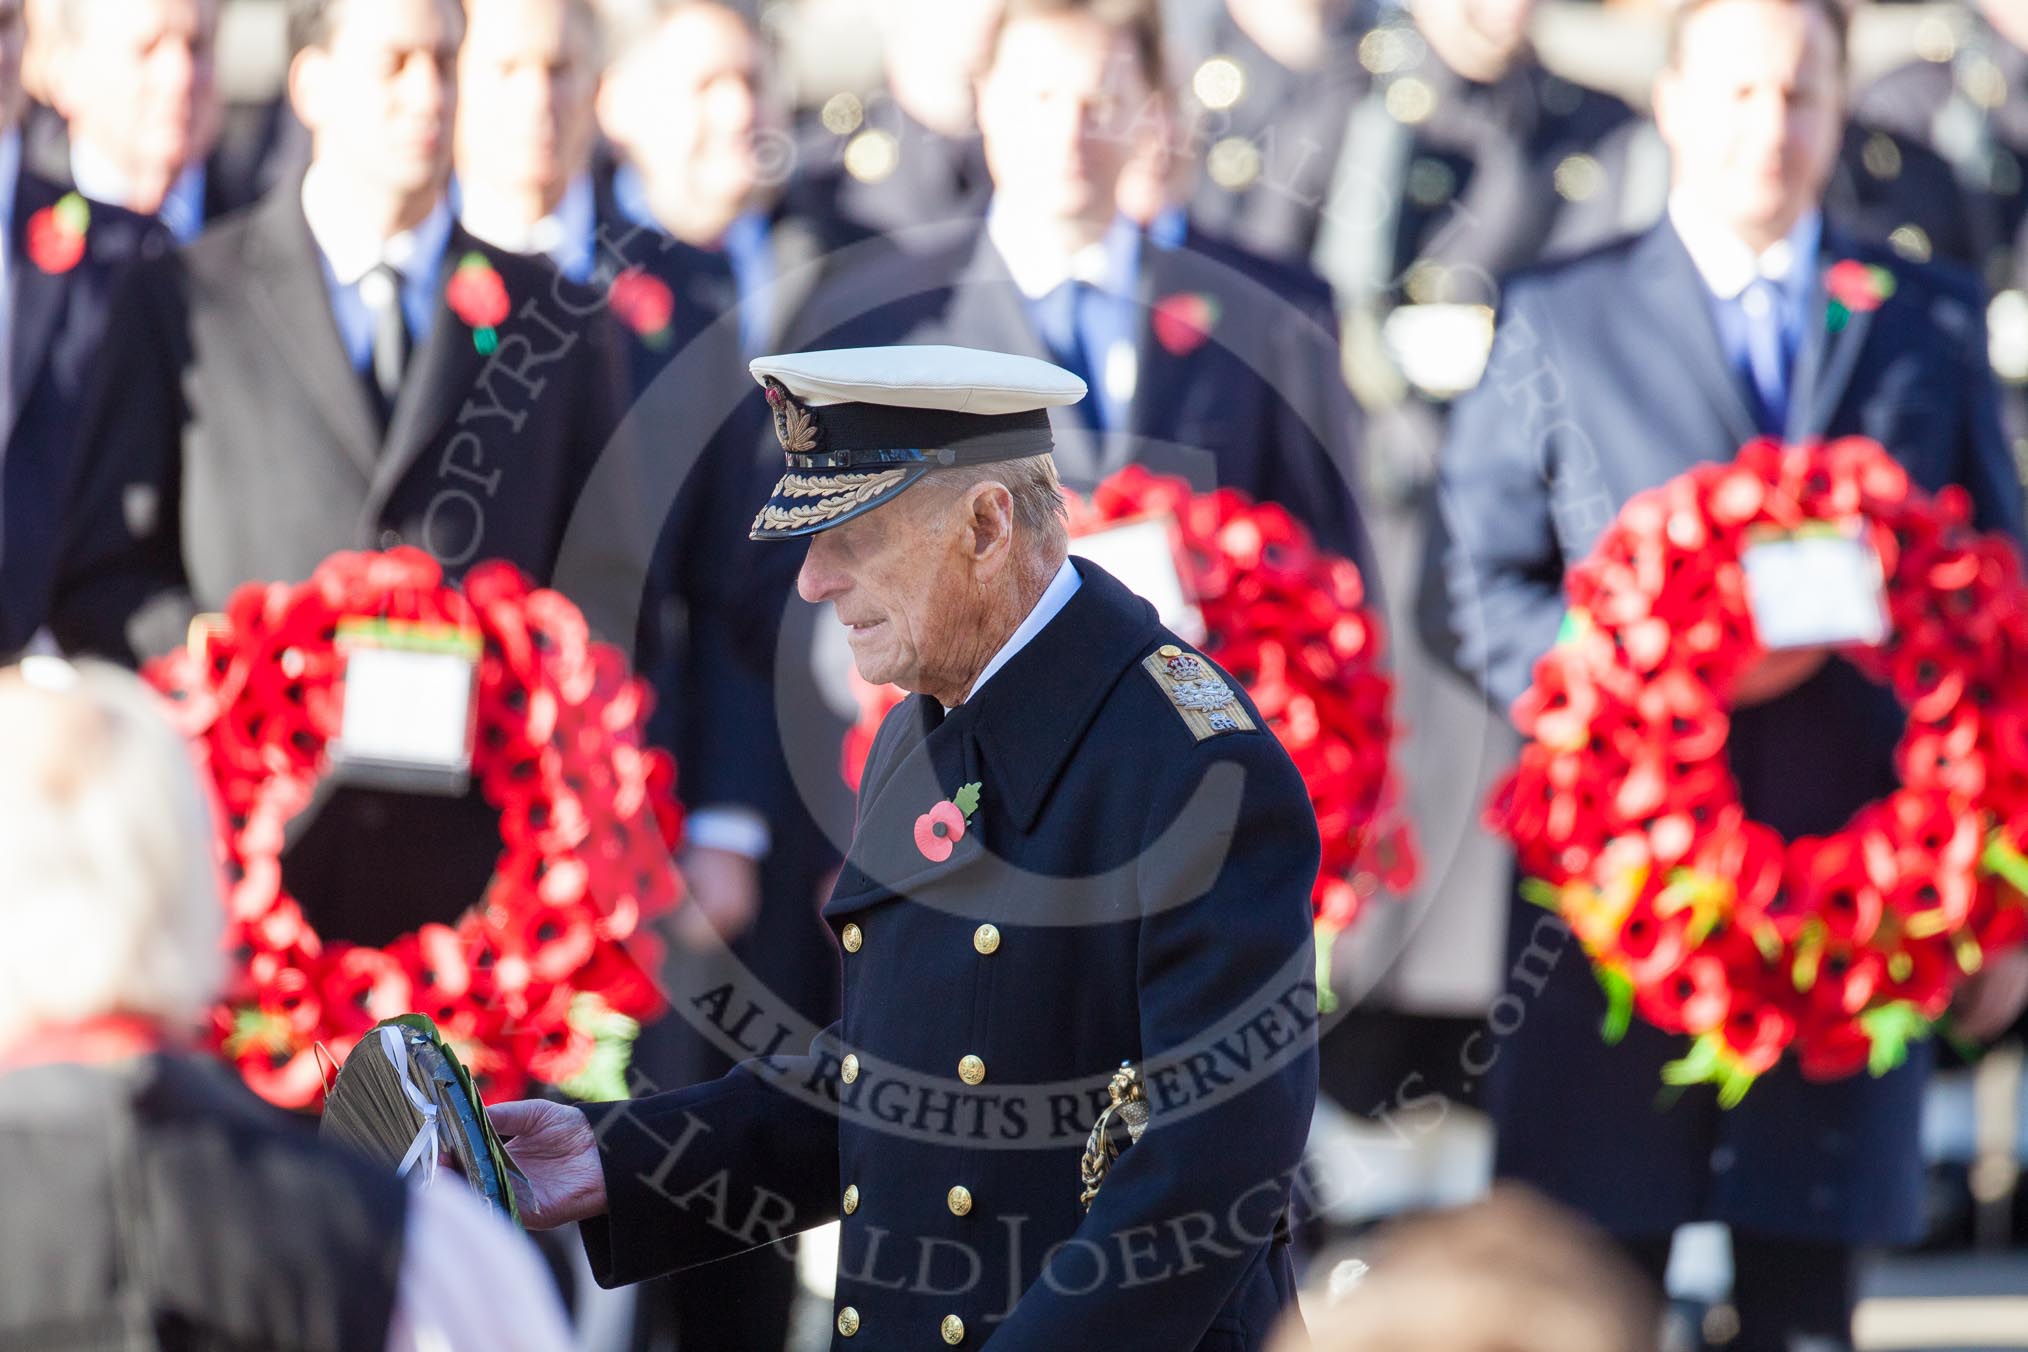 HRH The Duke of Edinburgh, about to lay his wreath at the Cenotaph.